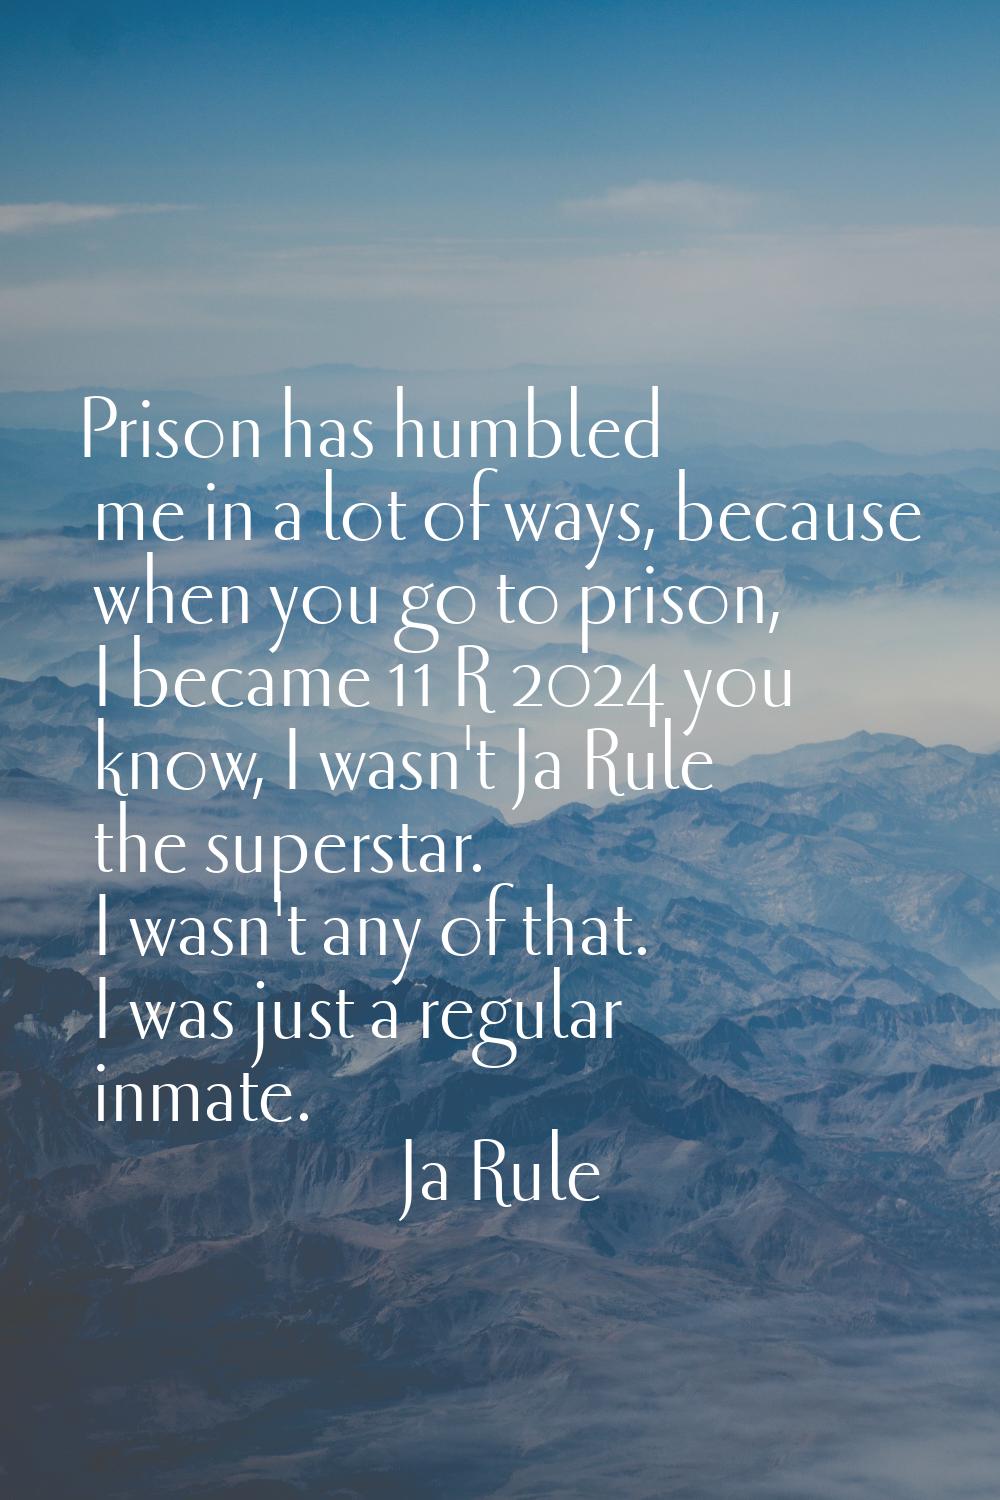 Prison has humbled me in a lot of ways, because when you go to prison, I became 11 R 2024 you know,